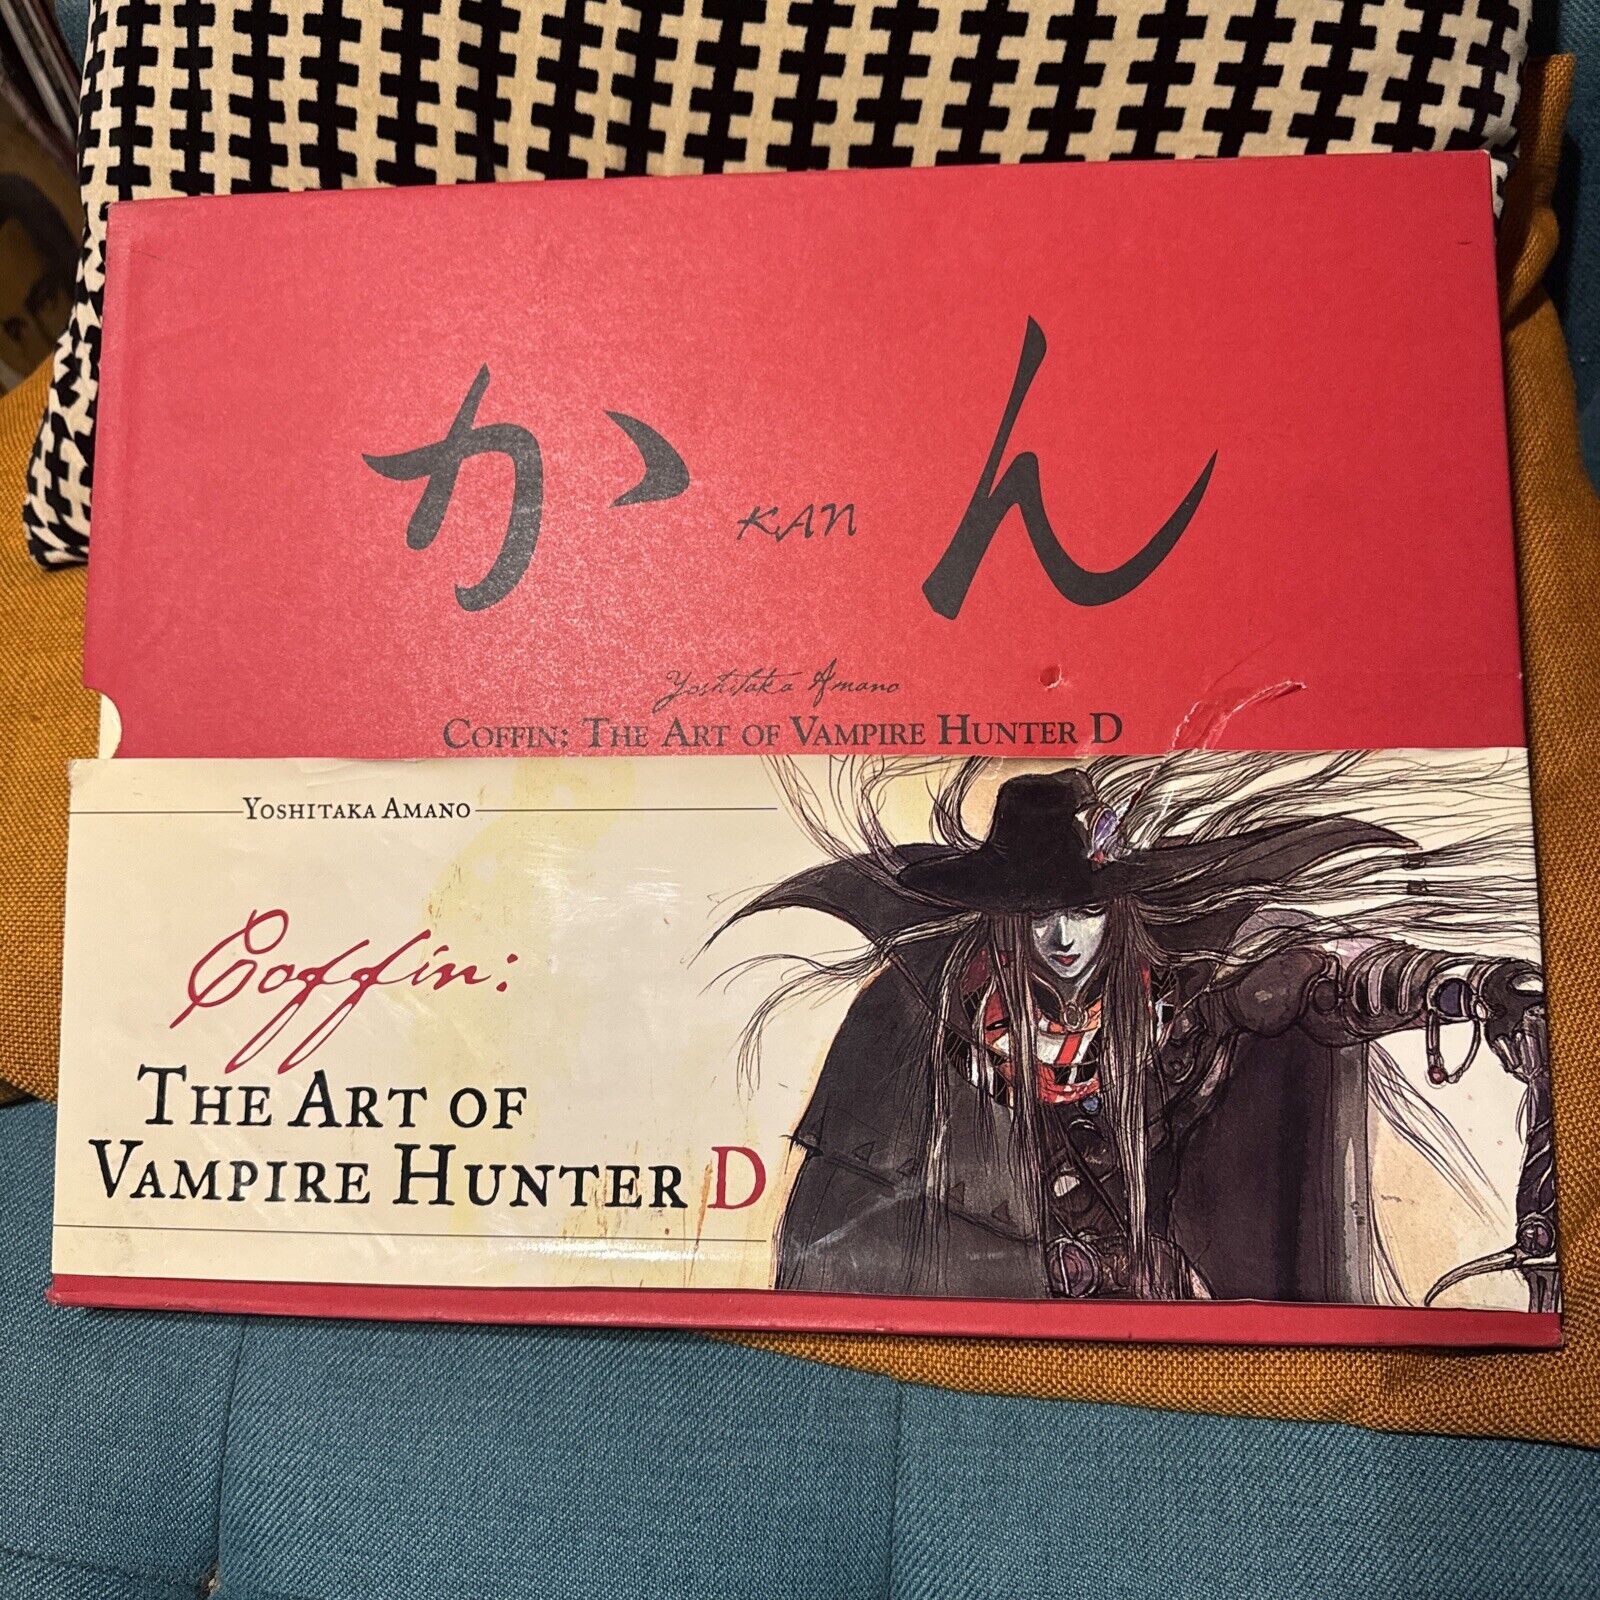 Coffin: The Art of Vampire Hunter D by Yoshitaka Amano Book in Slip Case SEE PIC